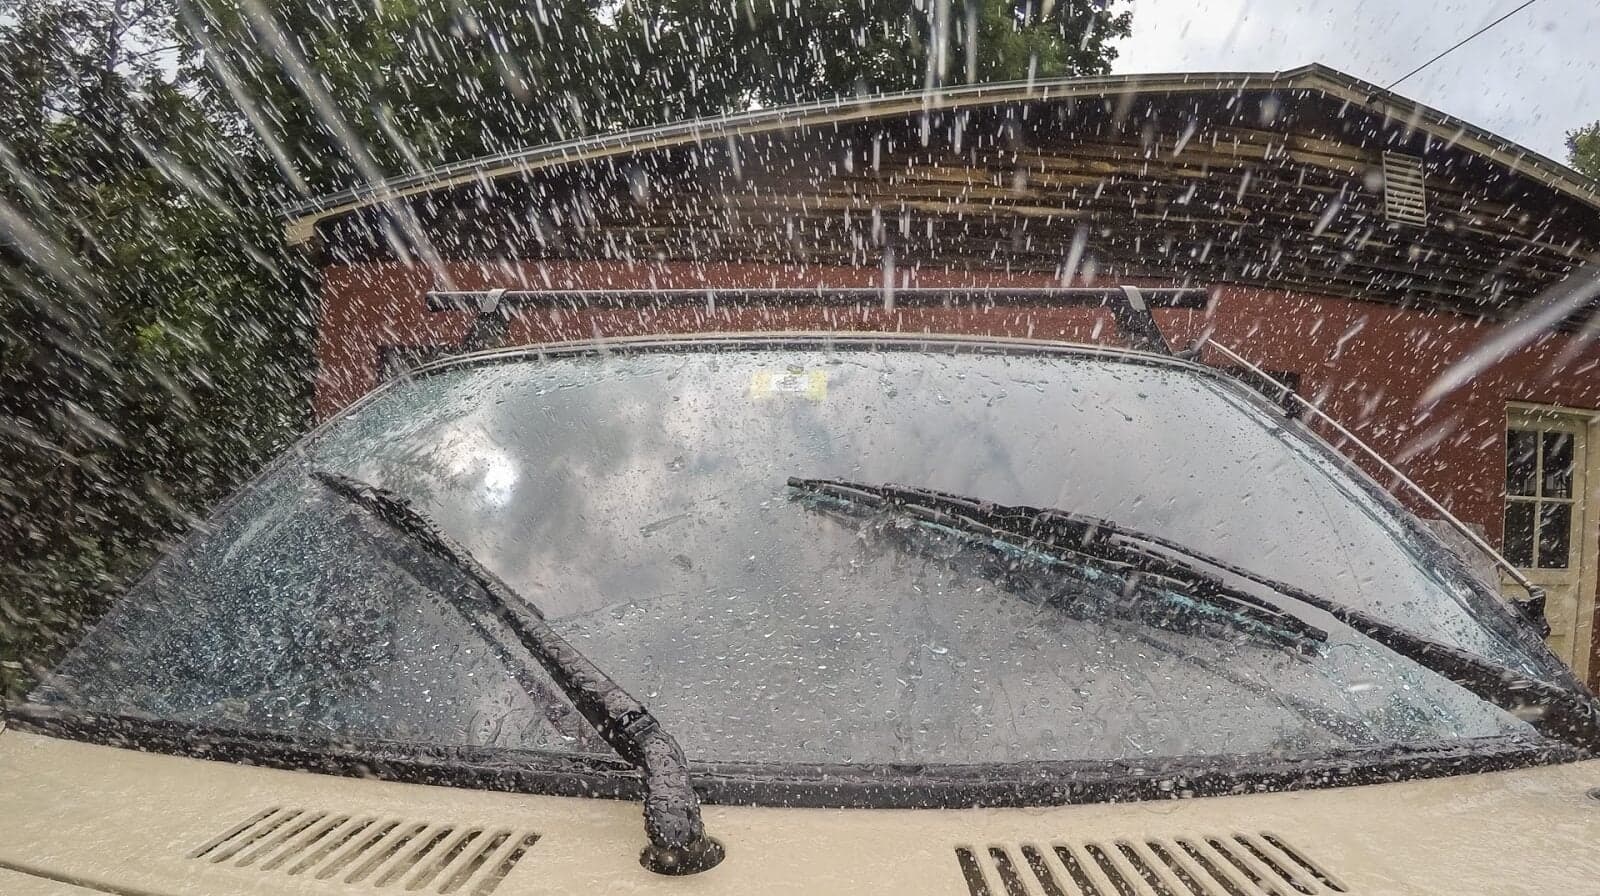 Hands-On Review: Testing the Best Silicone Wiper Blades for Long-Lasting Clear Views